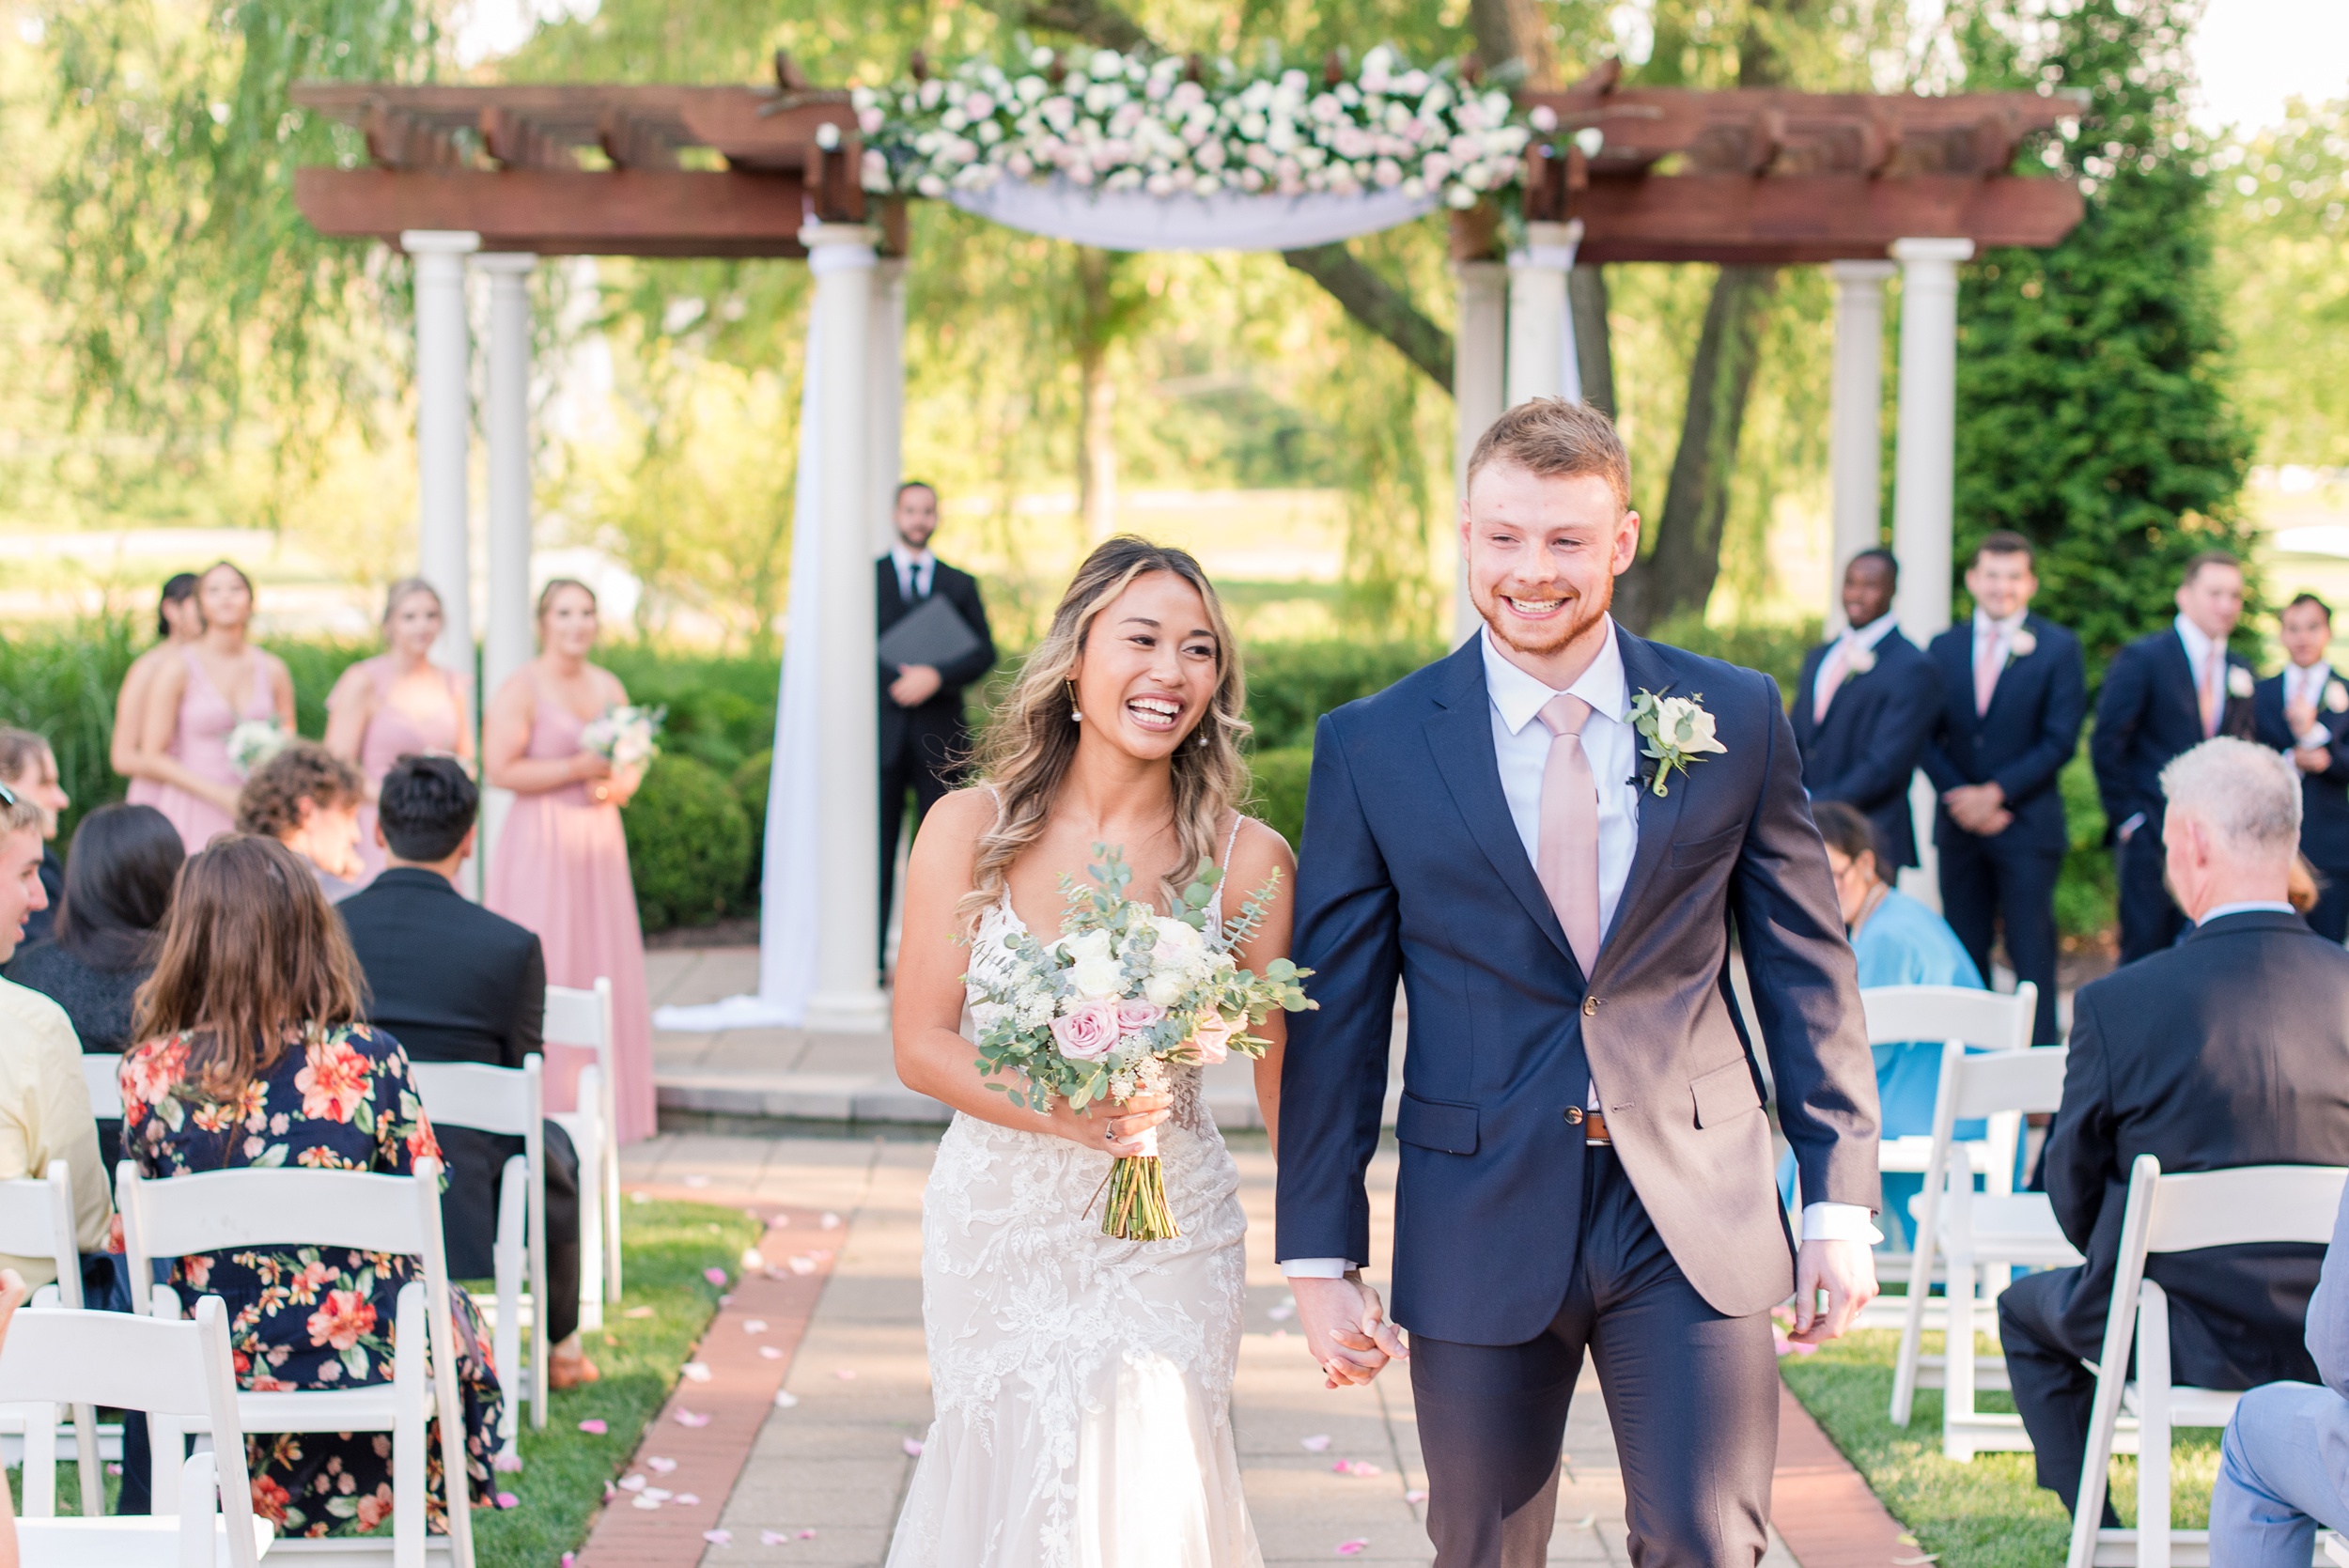 Newlyweds laugh and smile while walking up the aisle at their outdoor Turf Valley Resort Wedding ceremony